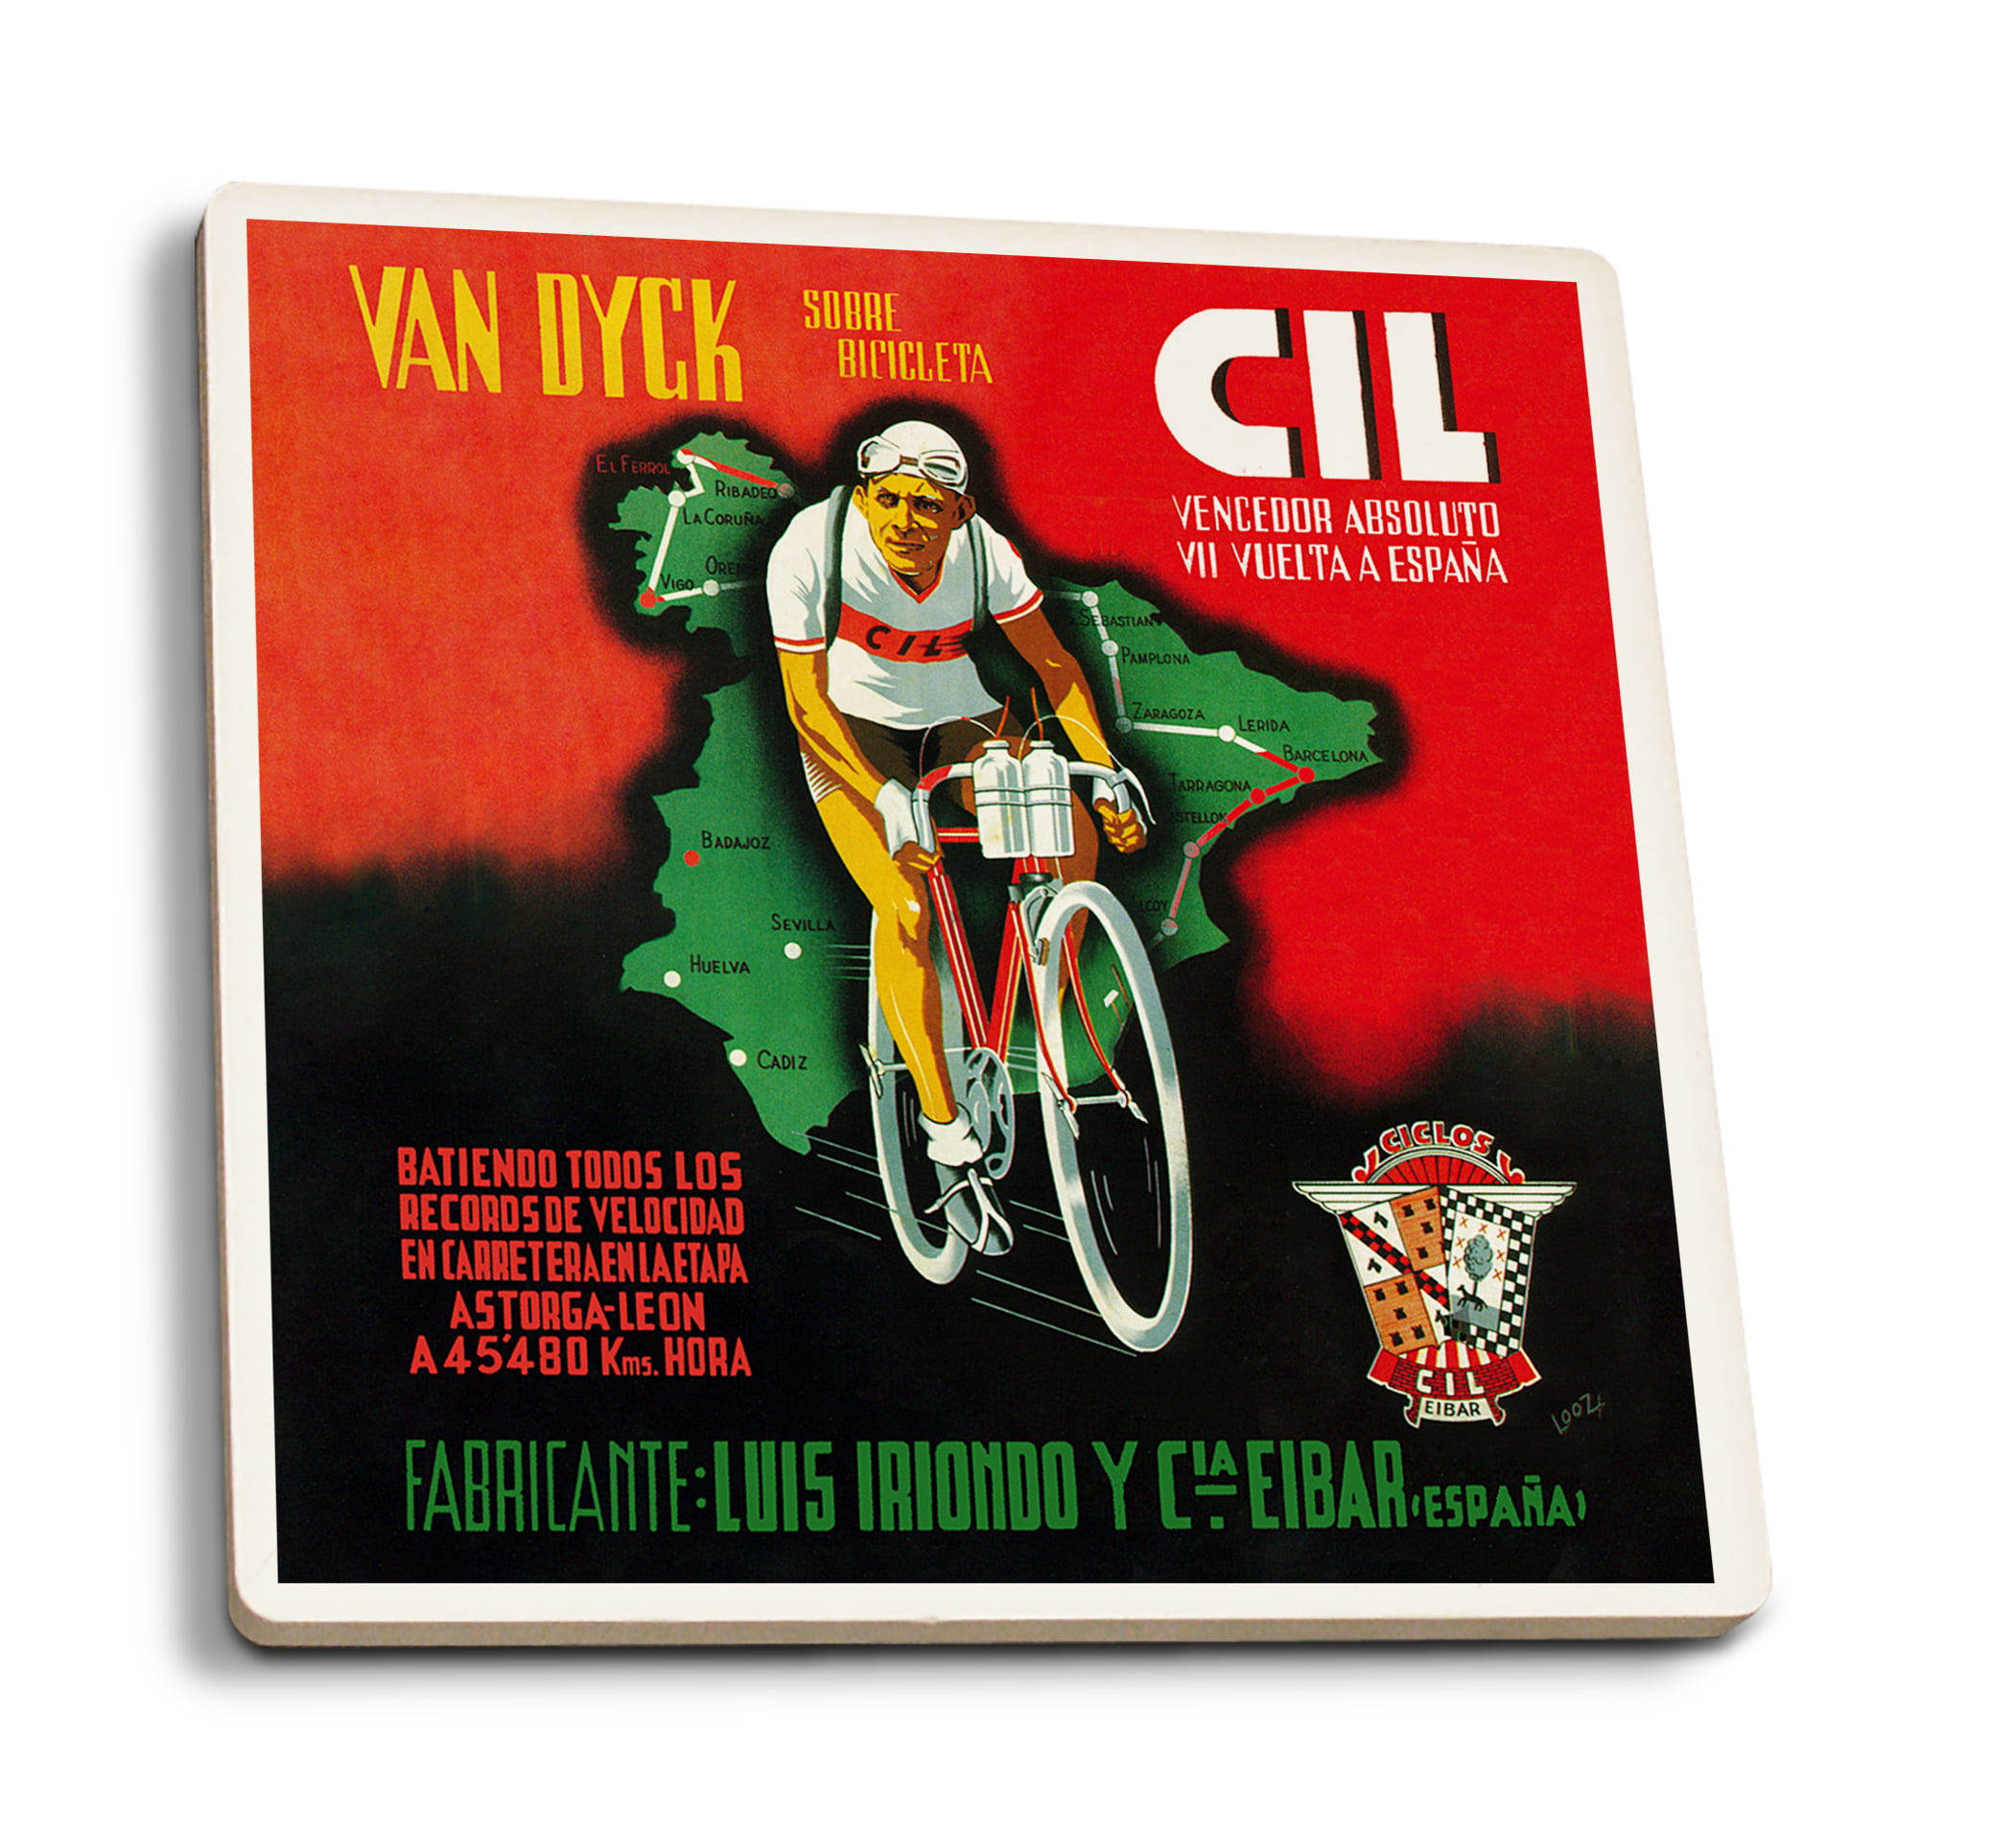 Bicycle of the World Set of 4 Ceramic Coasters - Cork-backed, Absorbent 